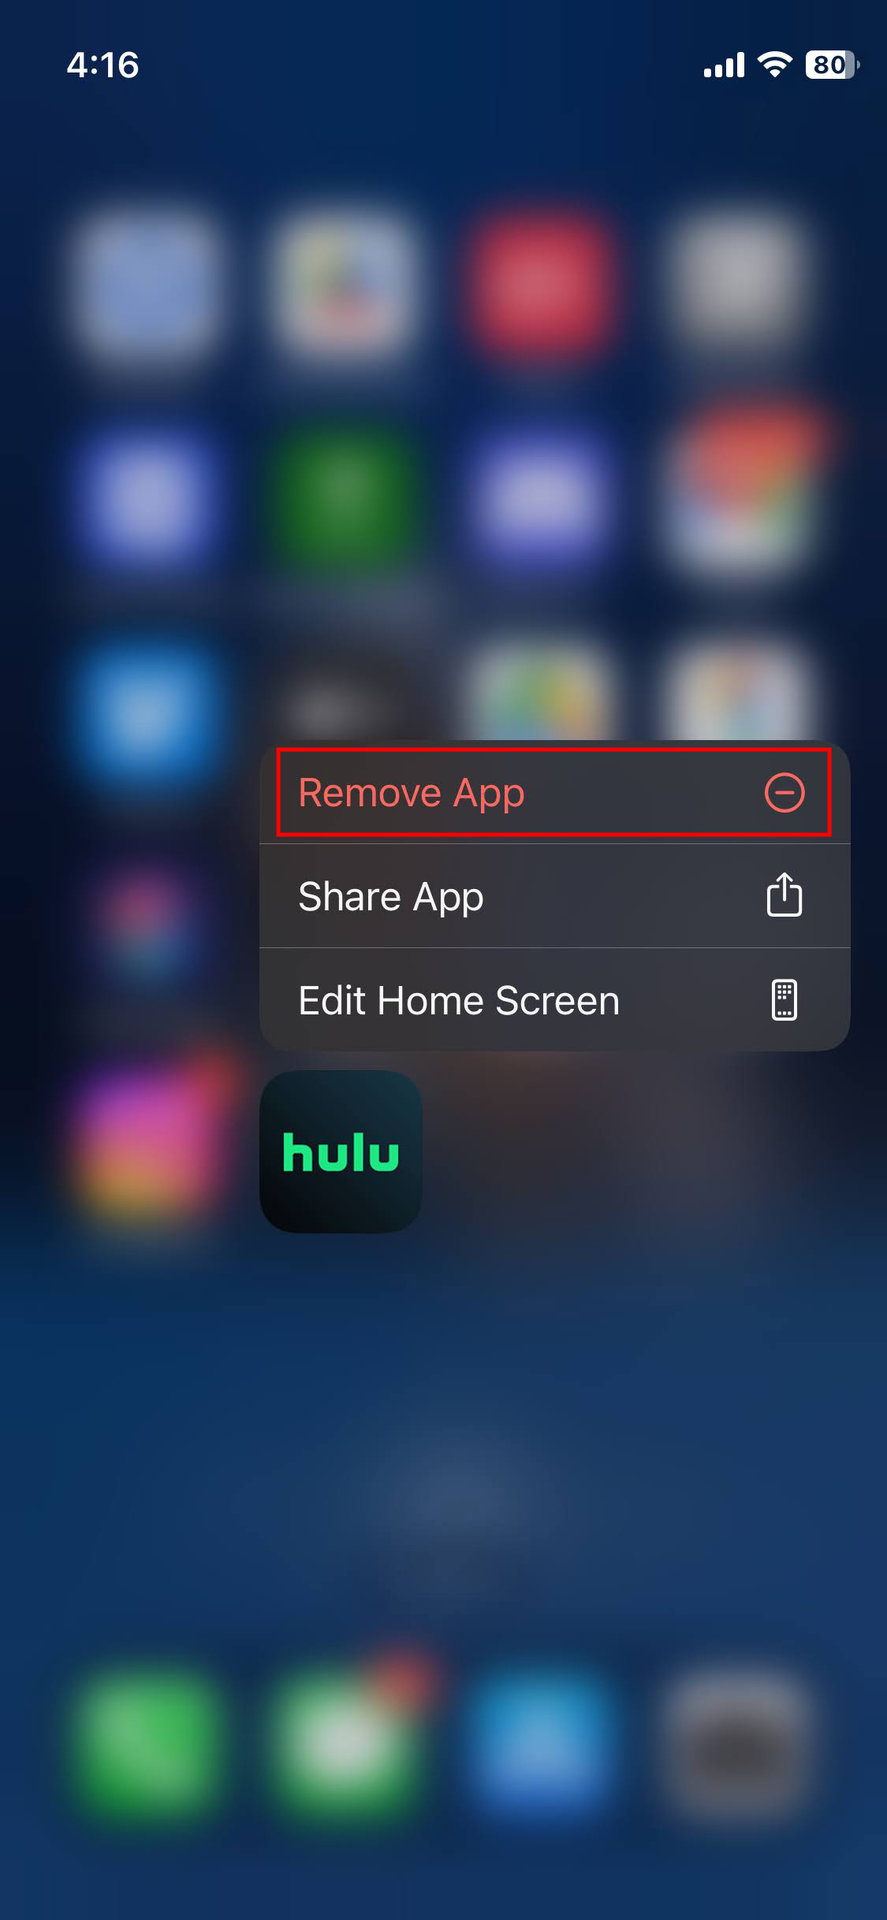 How to uninstall Hulu app on iPhone (2)